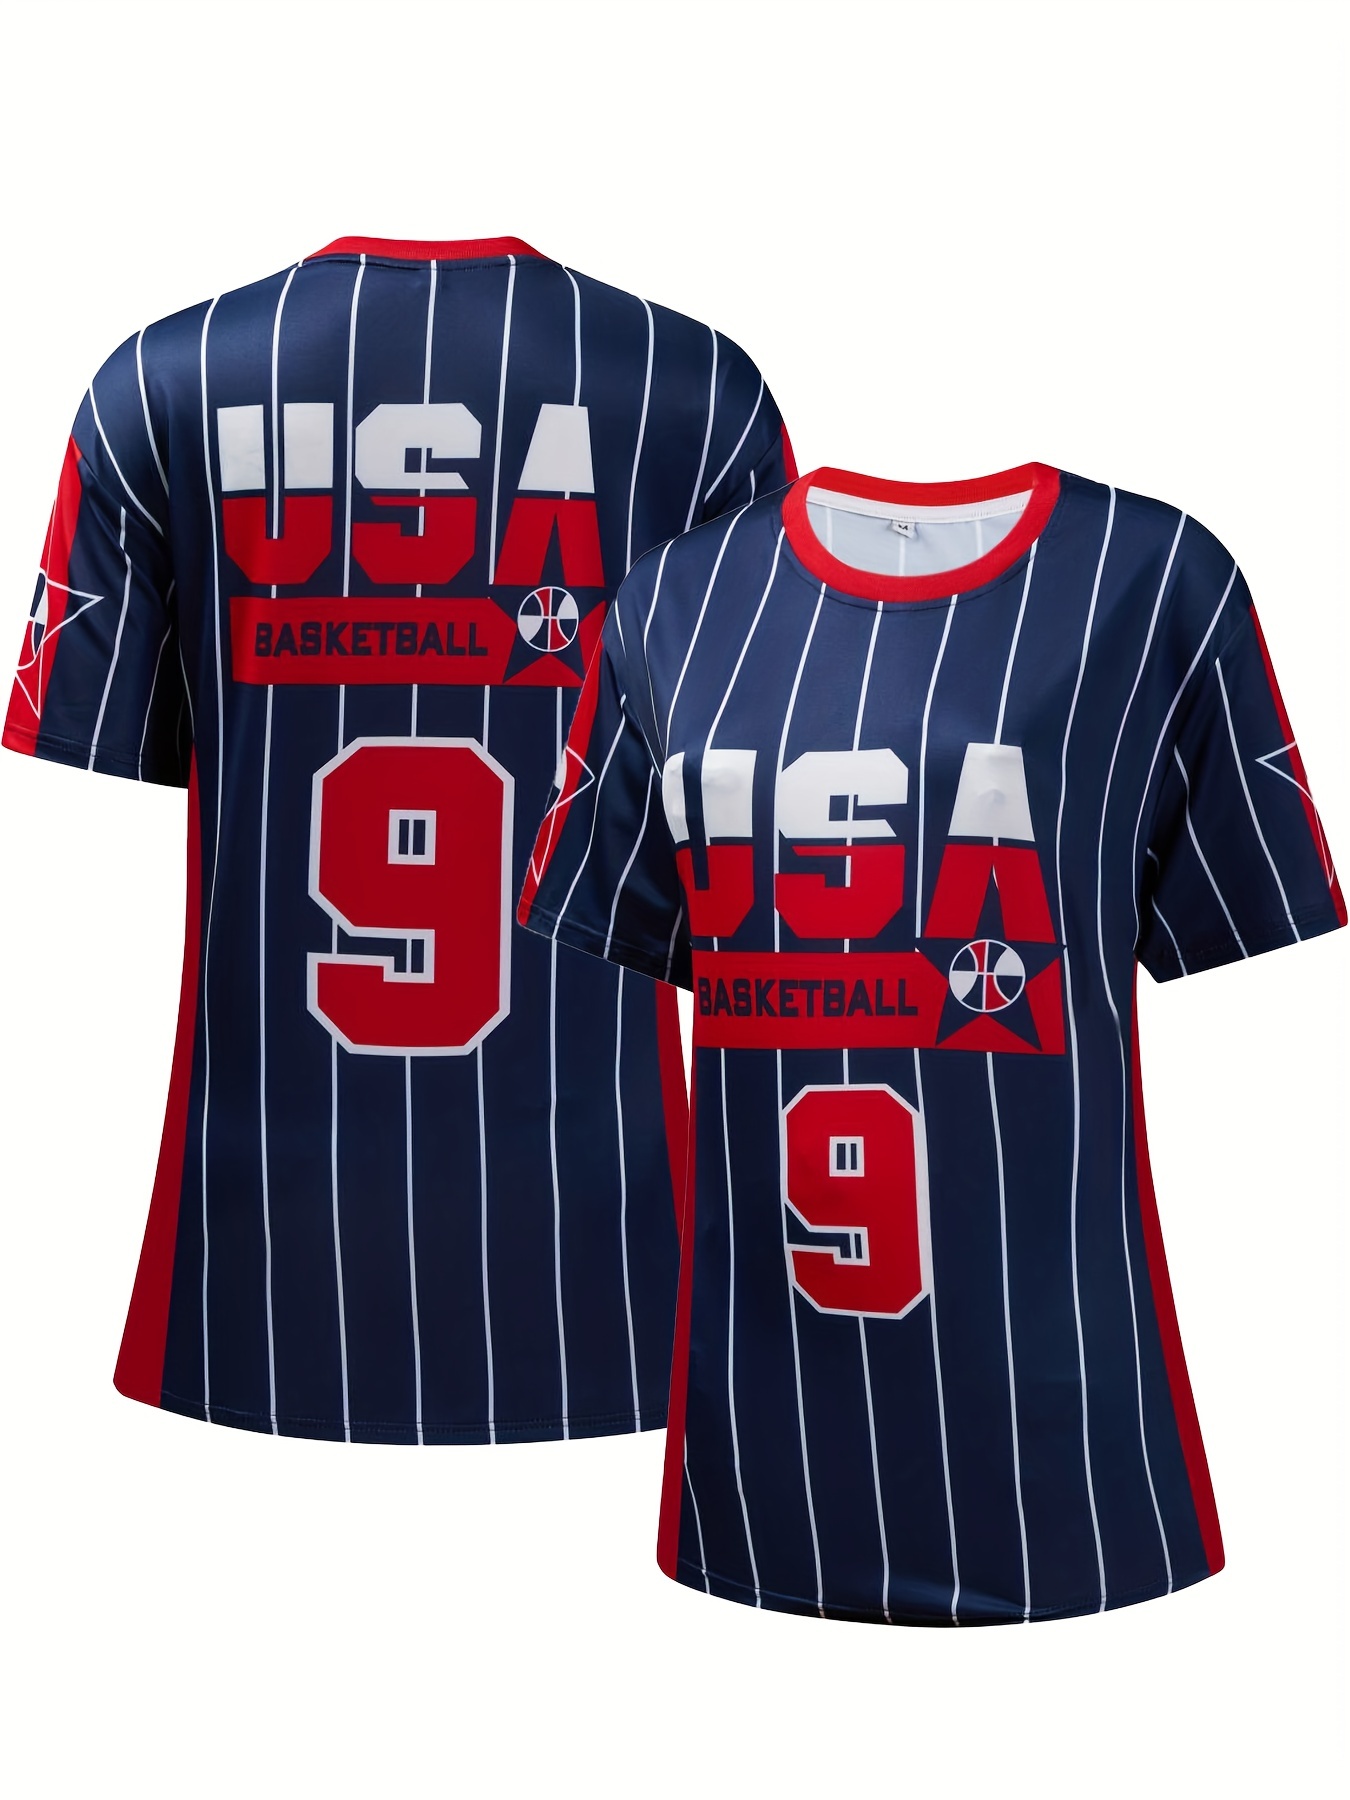  Los Angeles 99 Printed Baseball Jersey Shirt for Men and Women,  Short Sleeve Baseball Tops Sport Uniform for Party and Club : Sports 